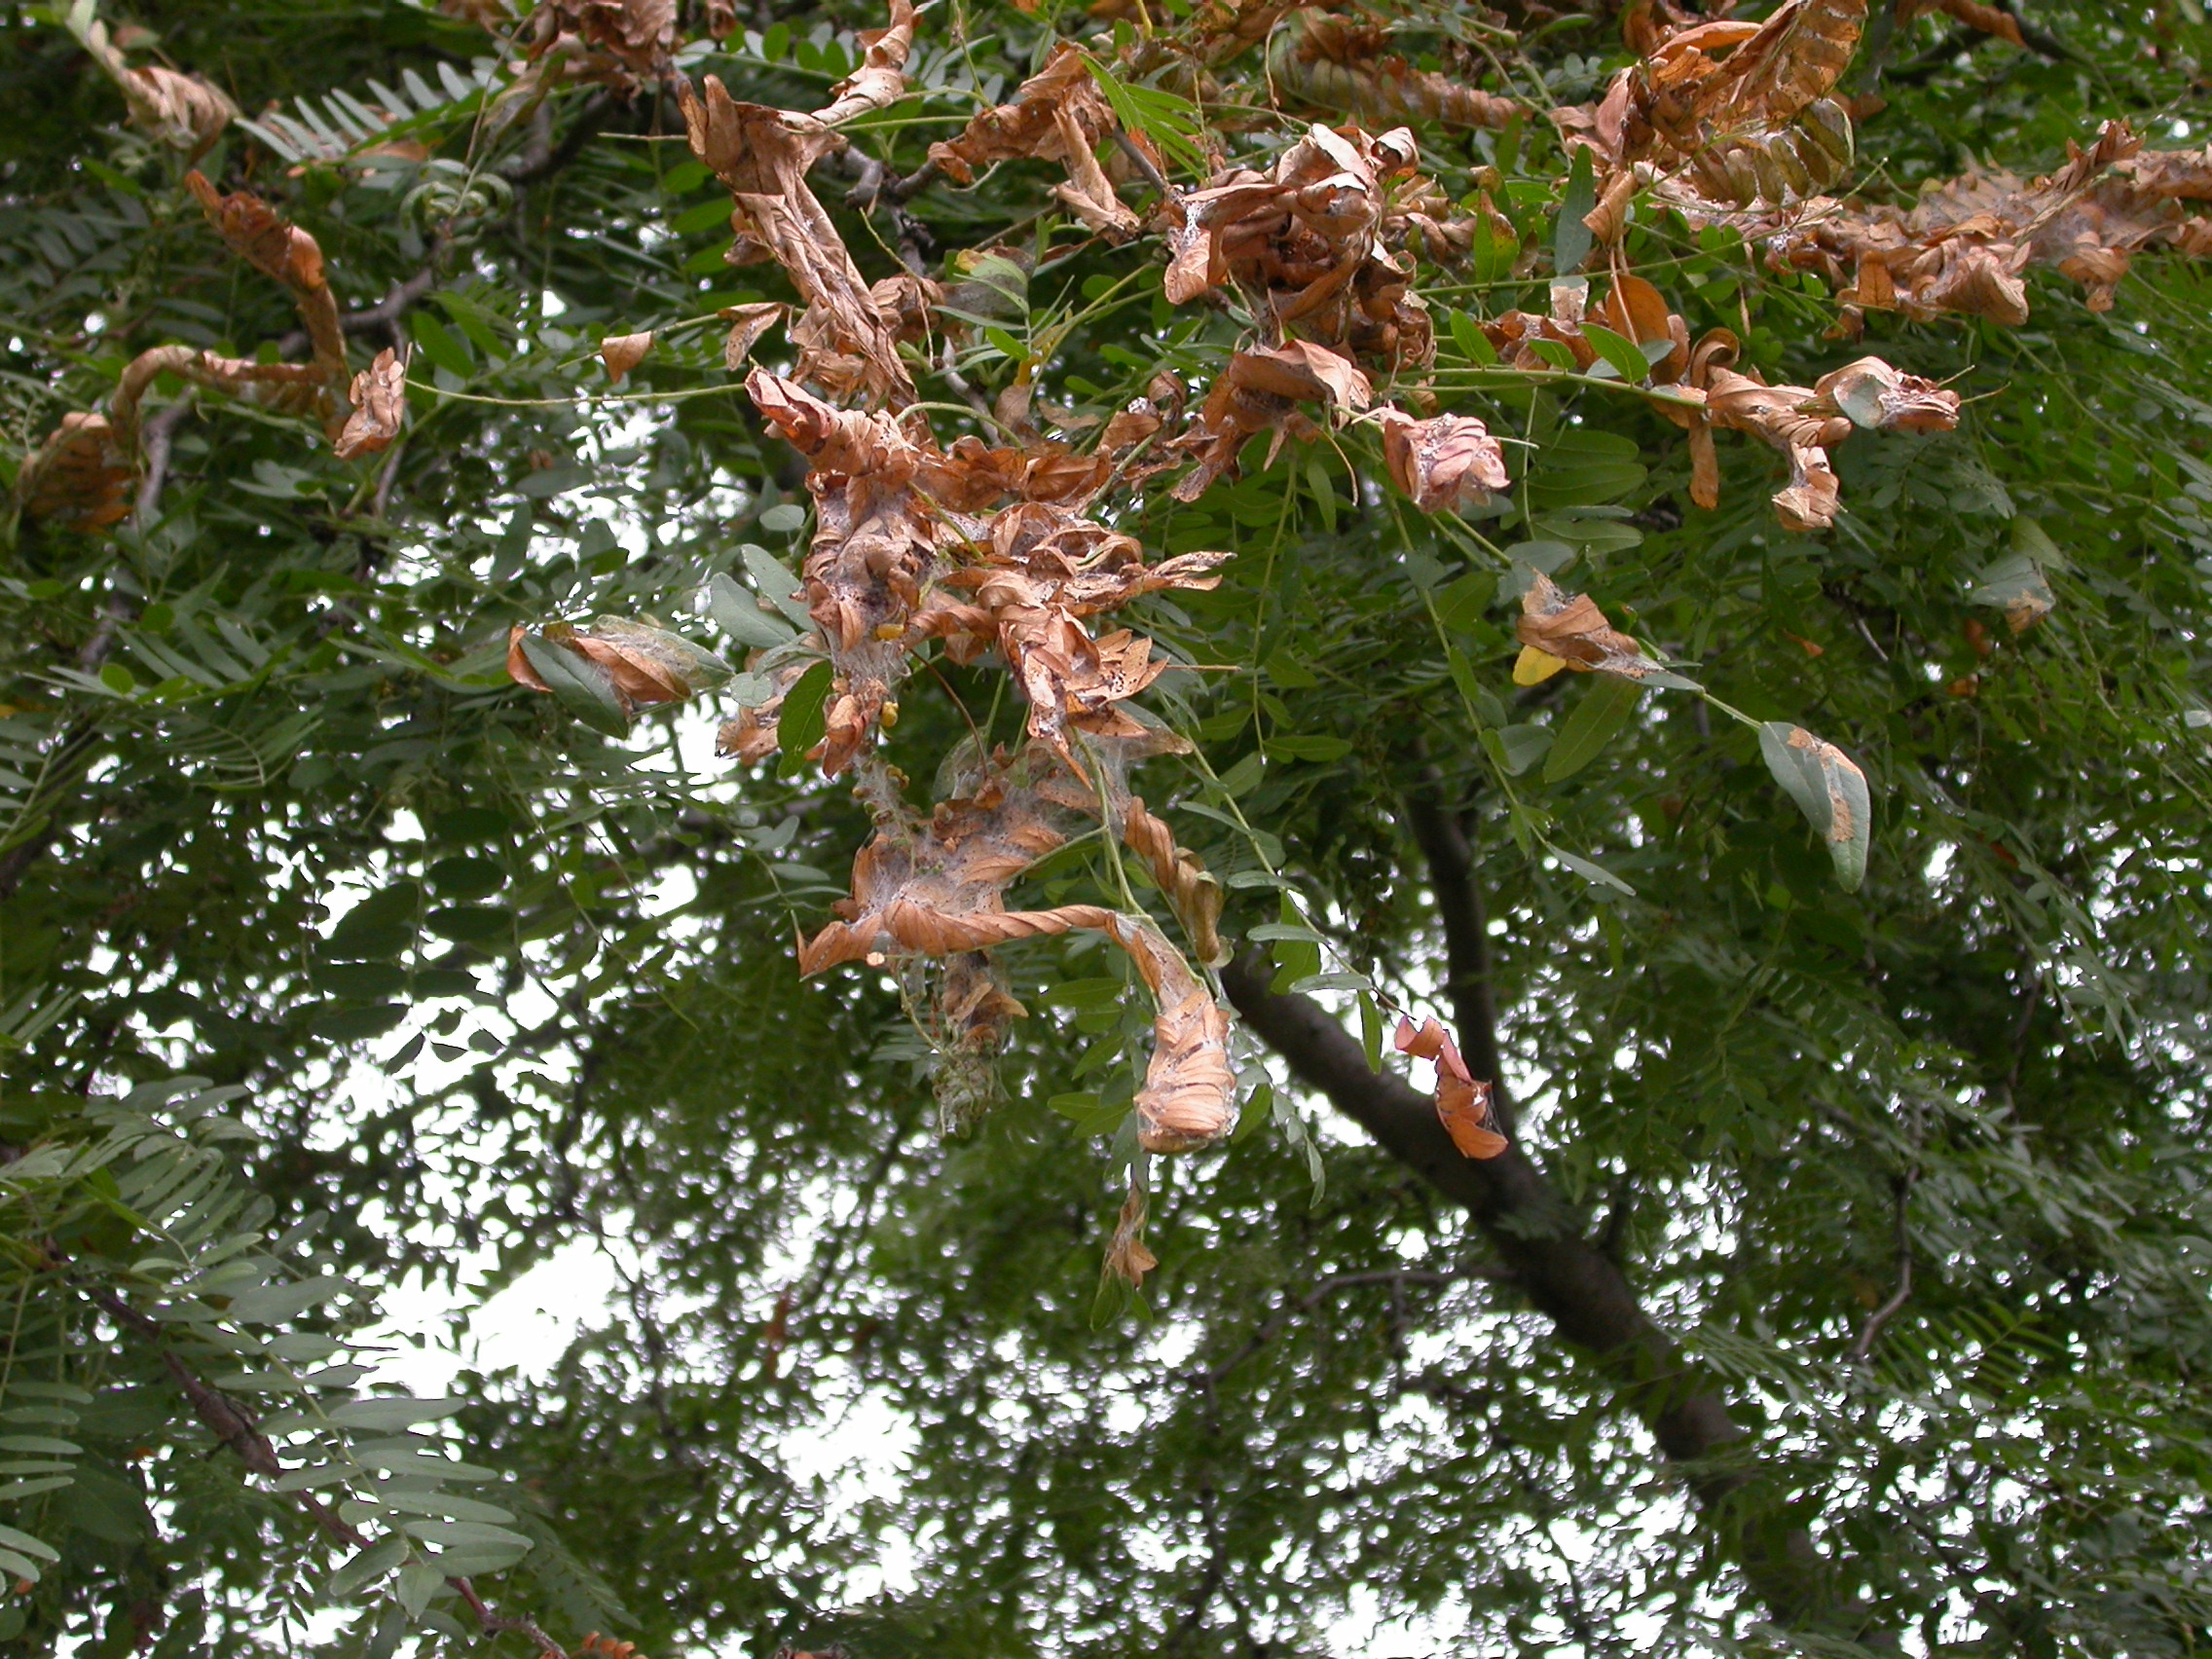 Browned leaves that have been tied together by mimosa webworm.